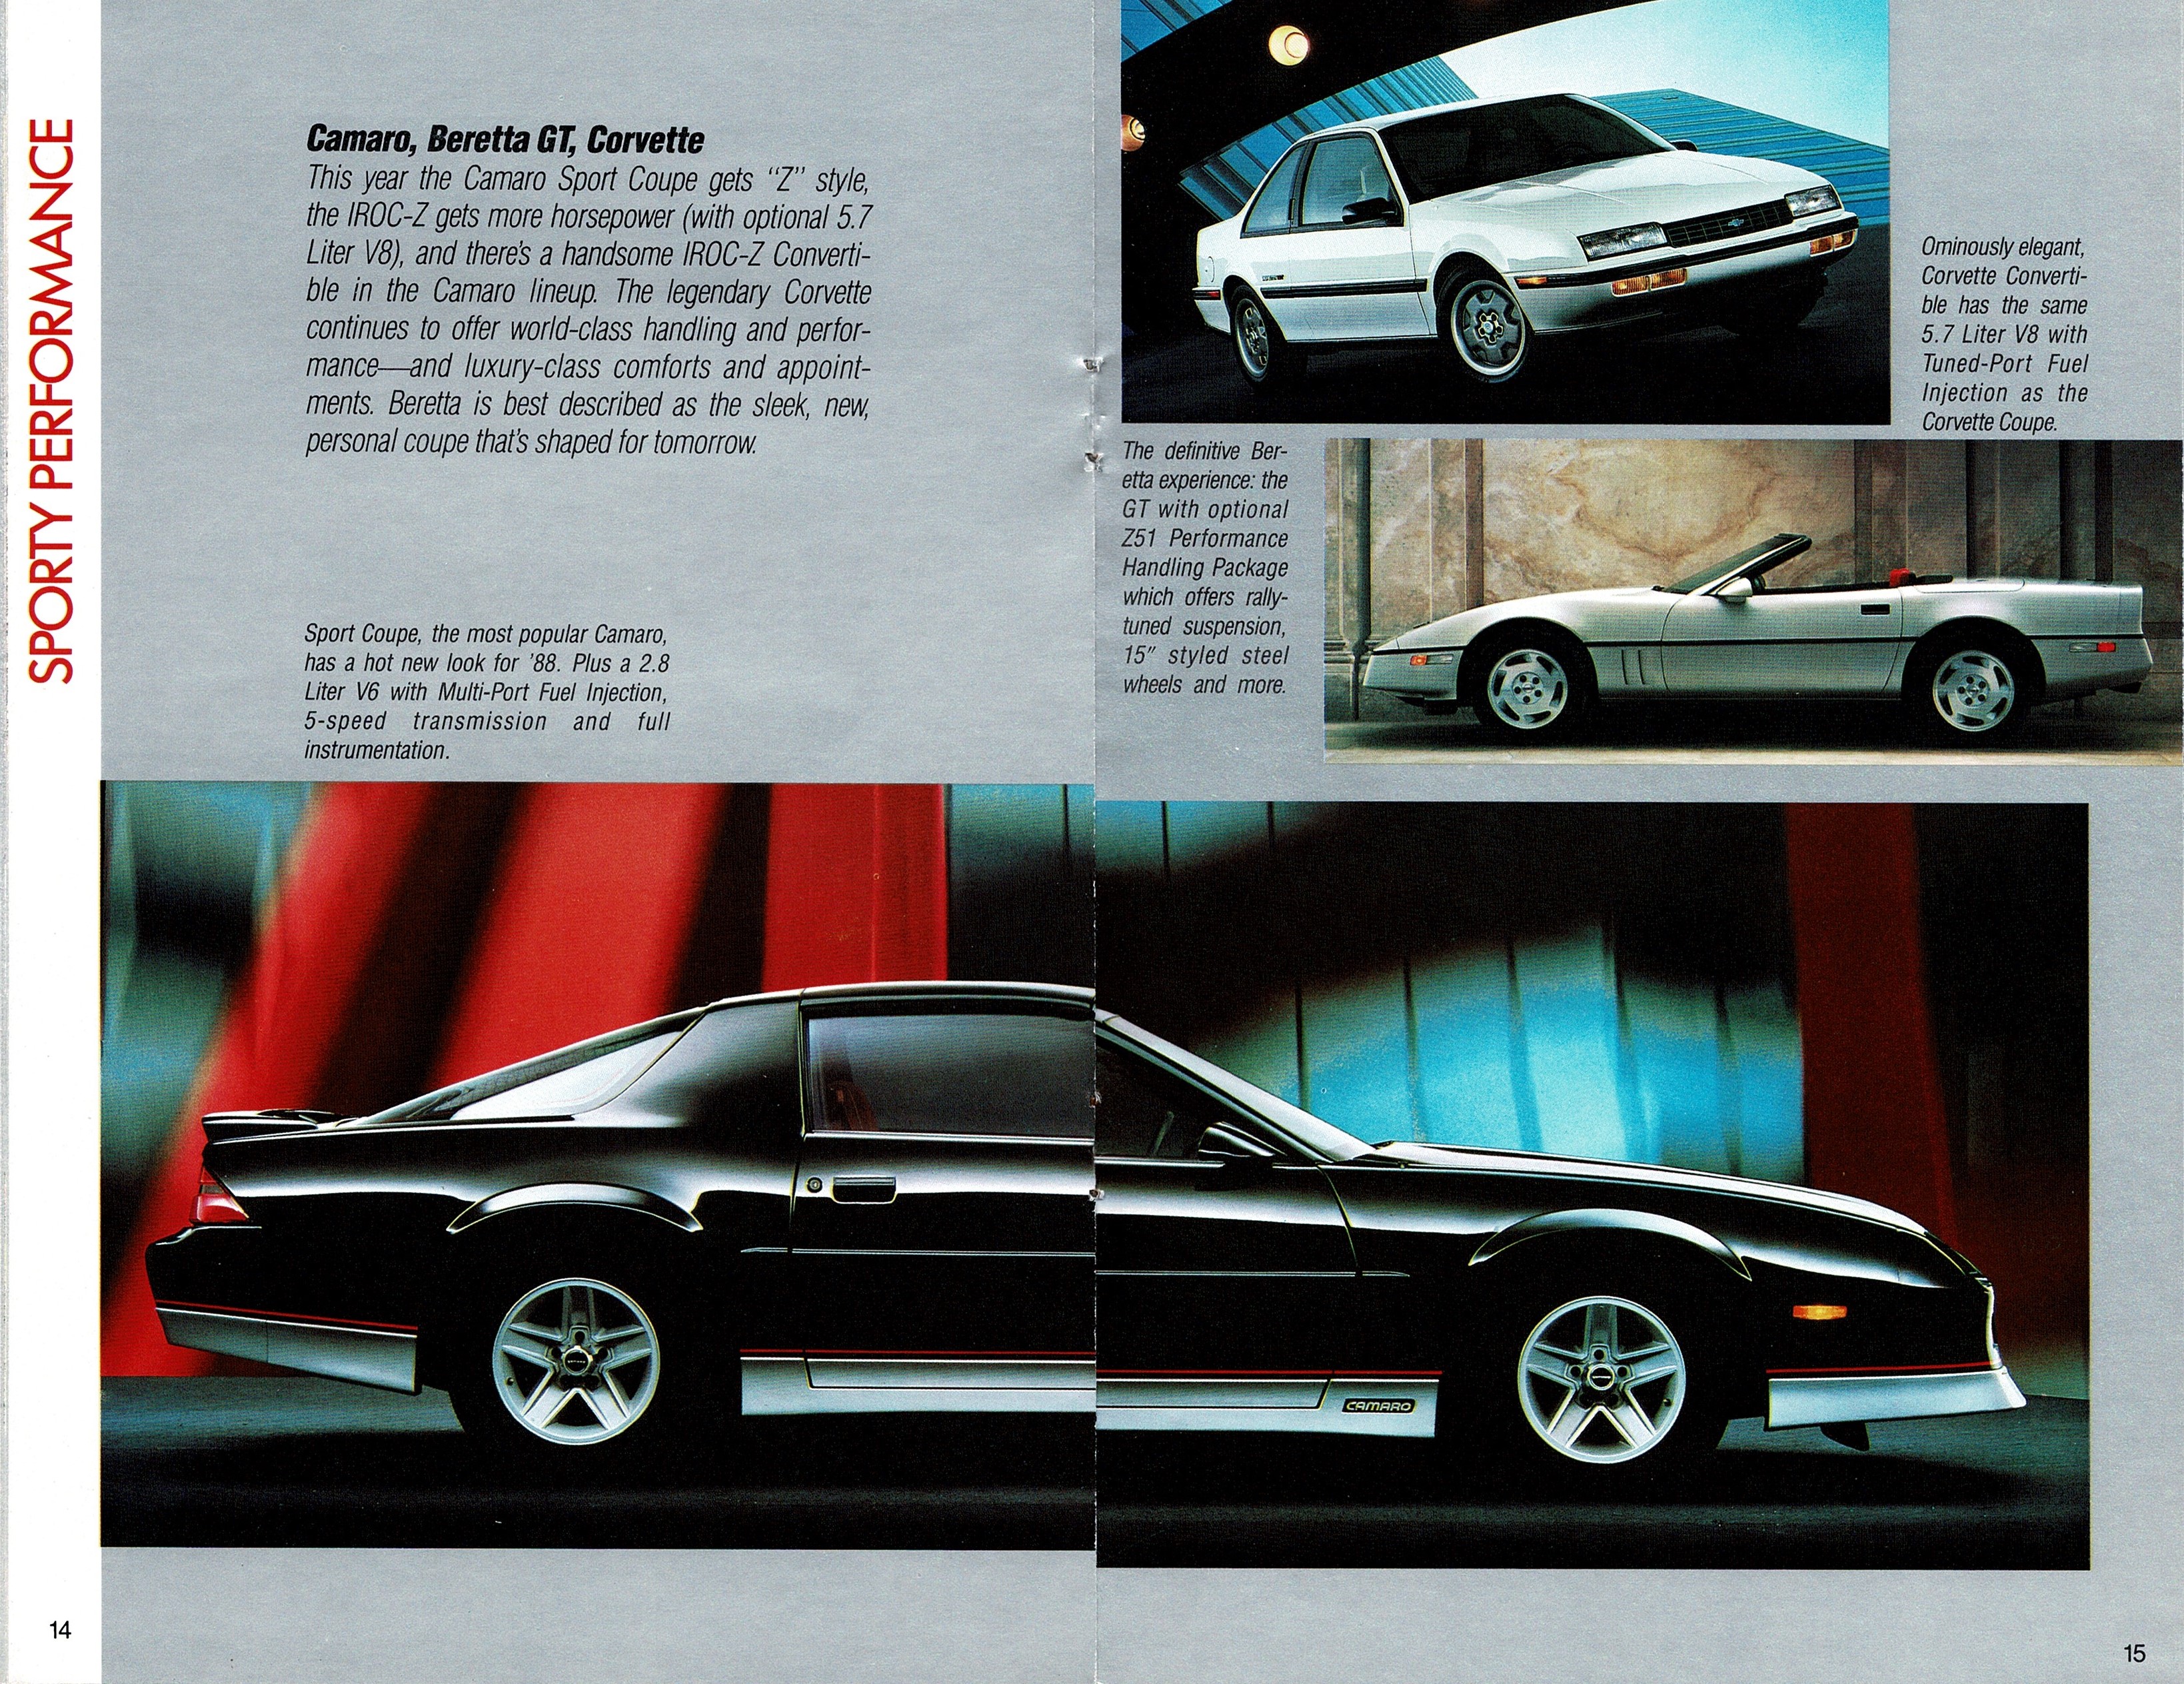 1988 Chevrolet Cars and Trucks_008